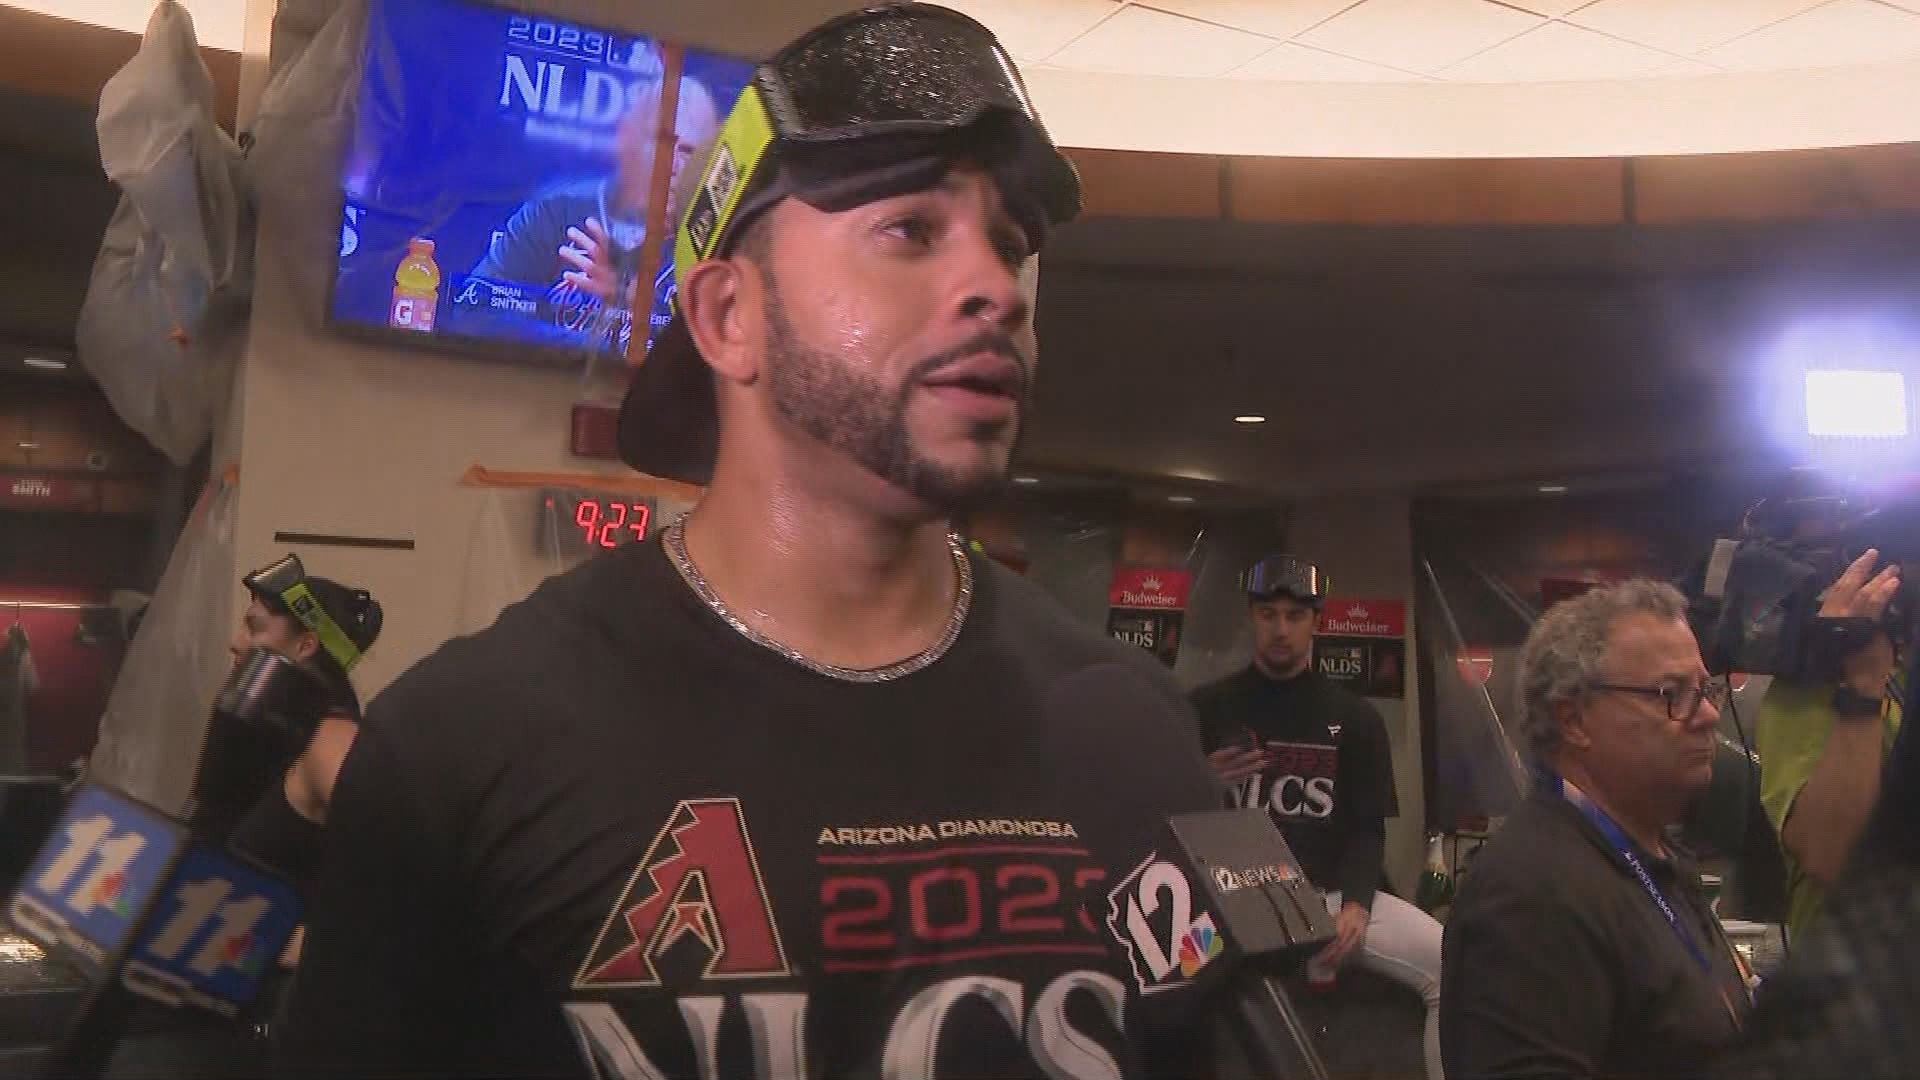 Tommy Pham reacts after D-backs sweep Dodgers in NLDS